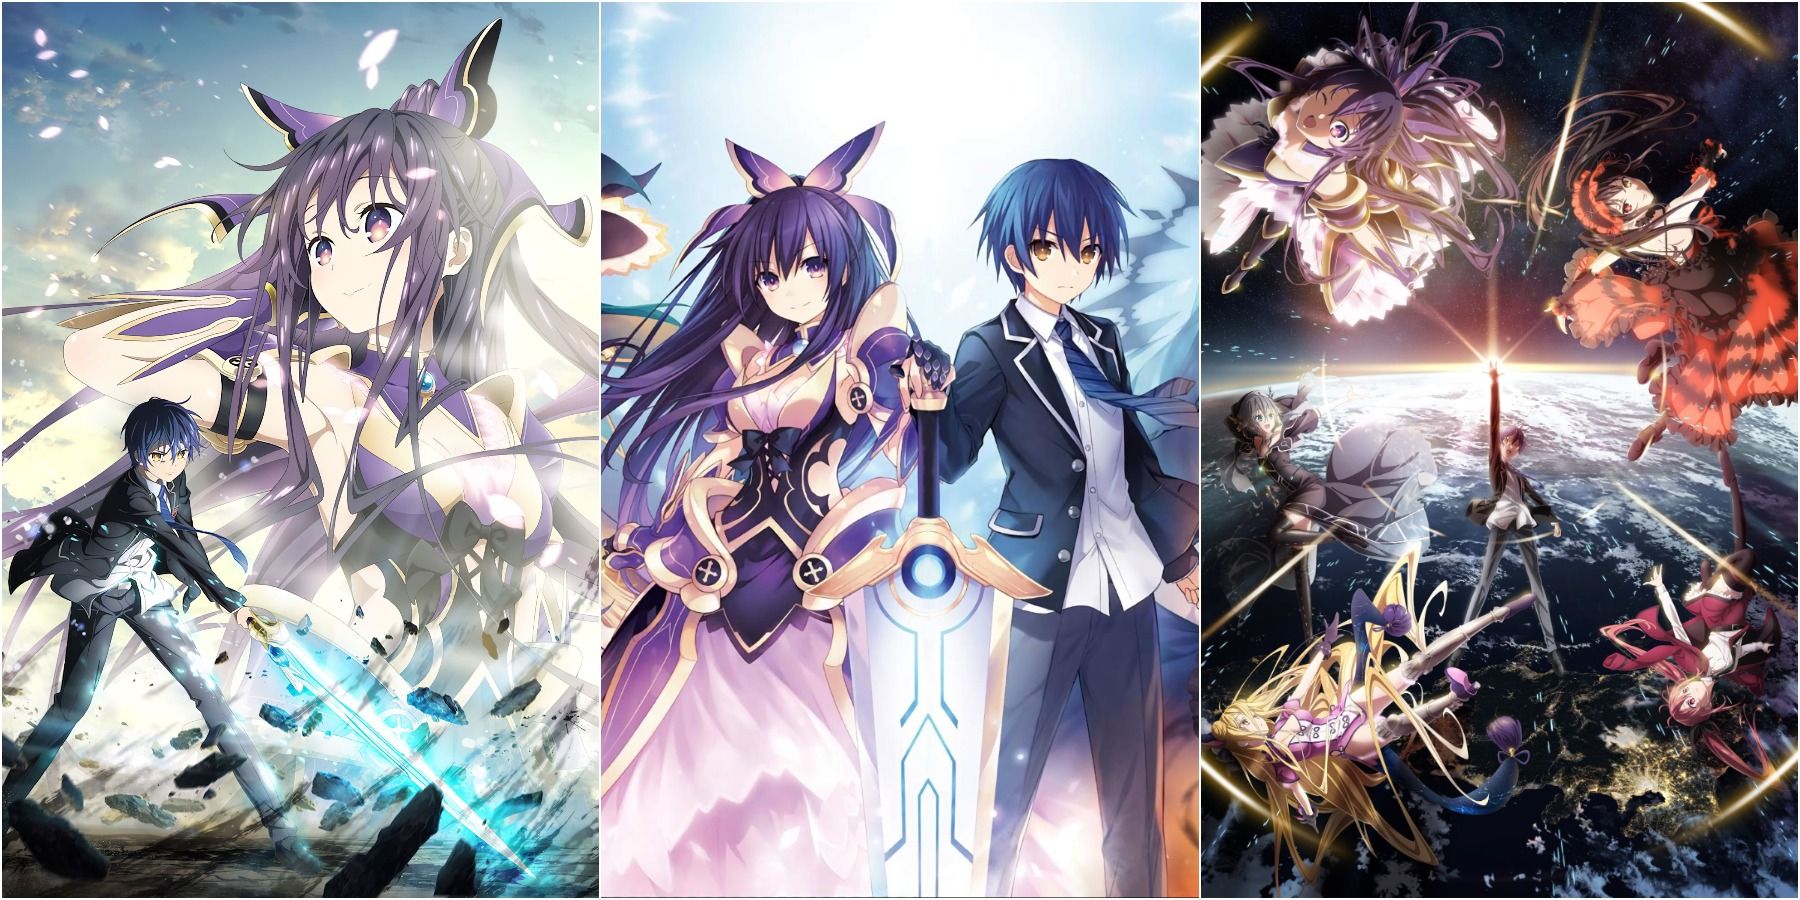 Date a Live IV Opening Exceeds 1 Million Views on